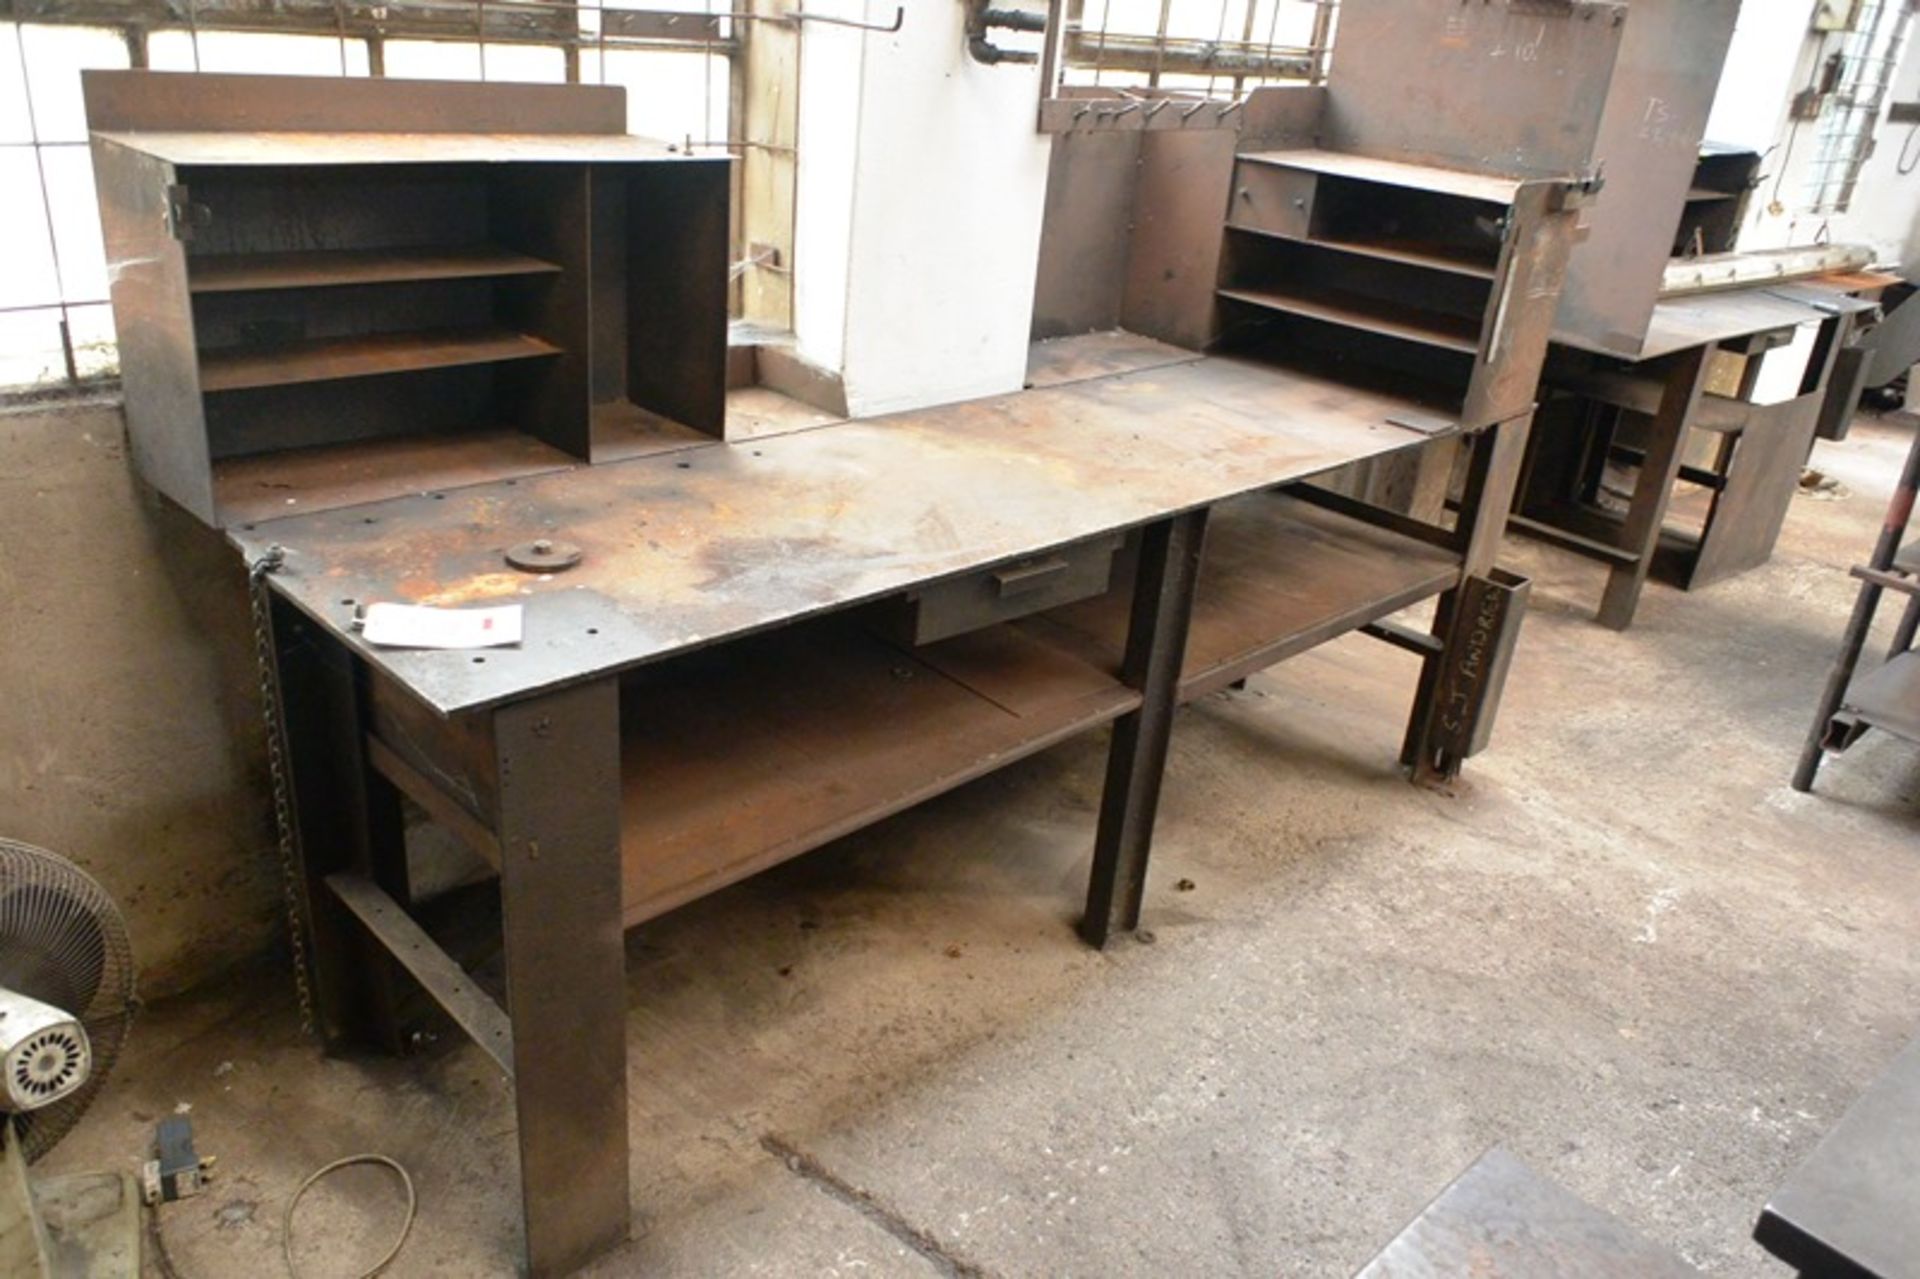 Steel workbench, approx 2450 x 600mm (Recommended collection period for this lot Wednesday 15th -